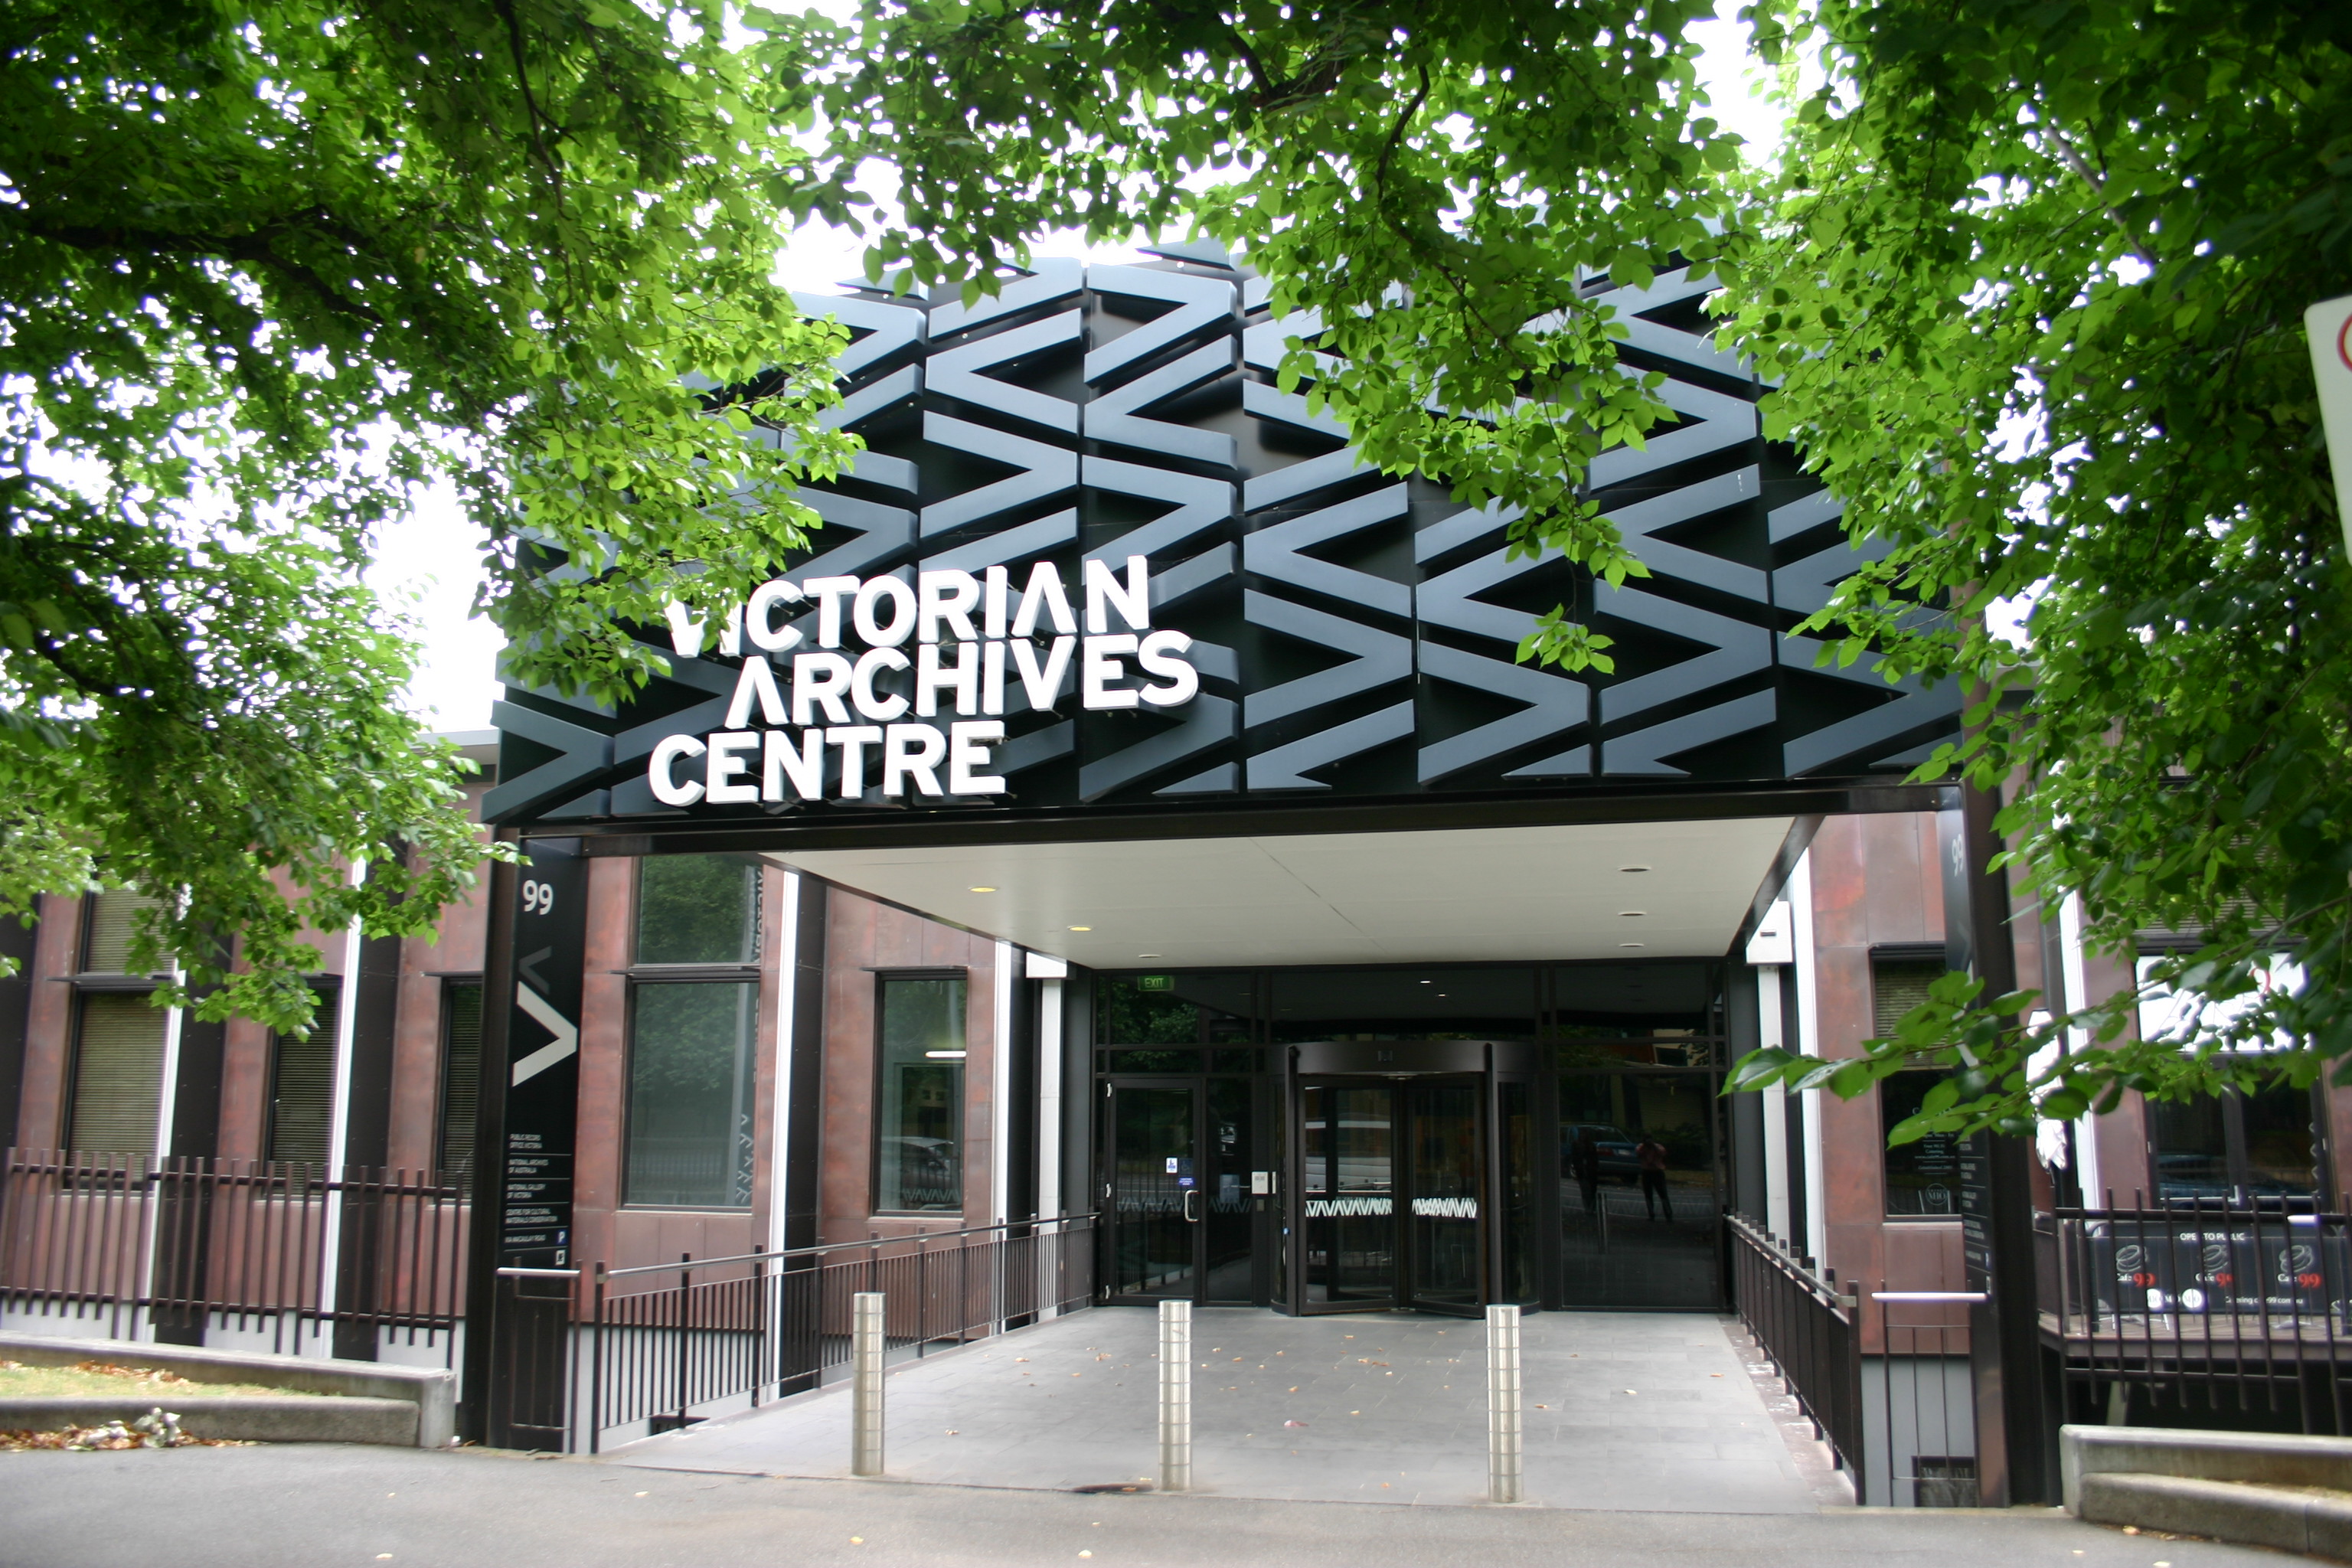 External view of the Victorian Archives Centre